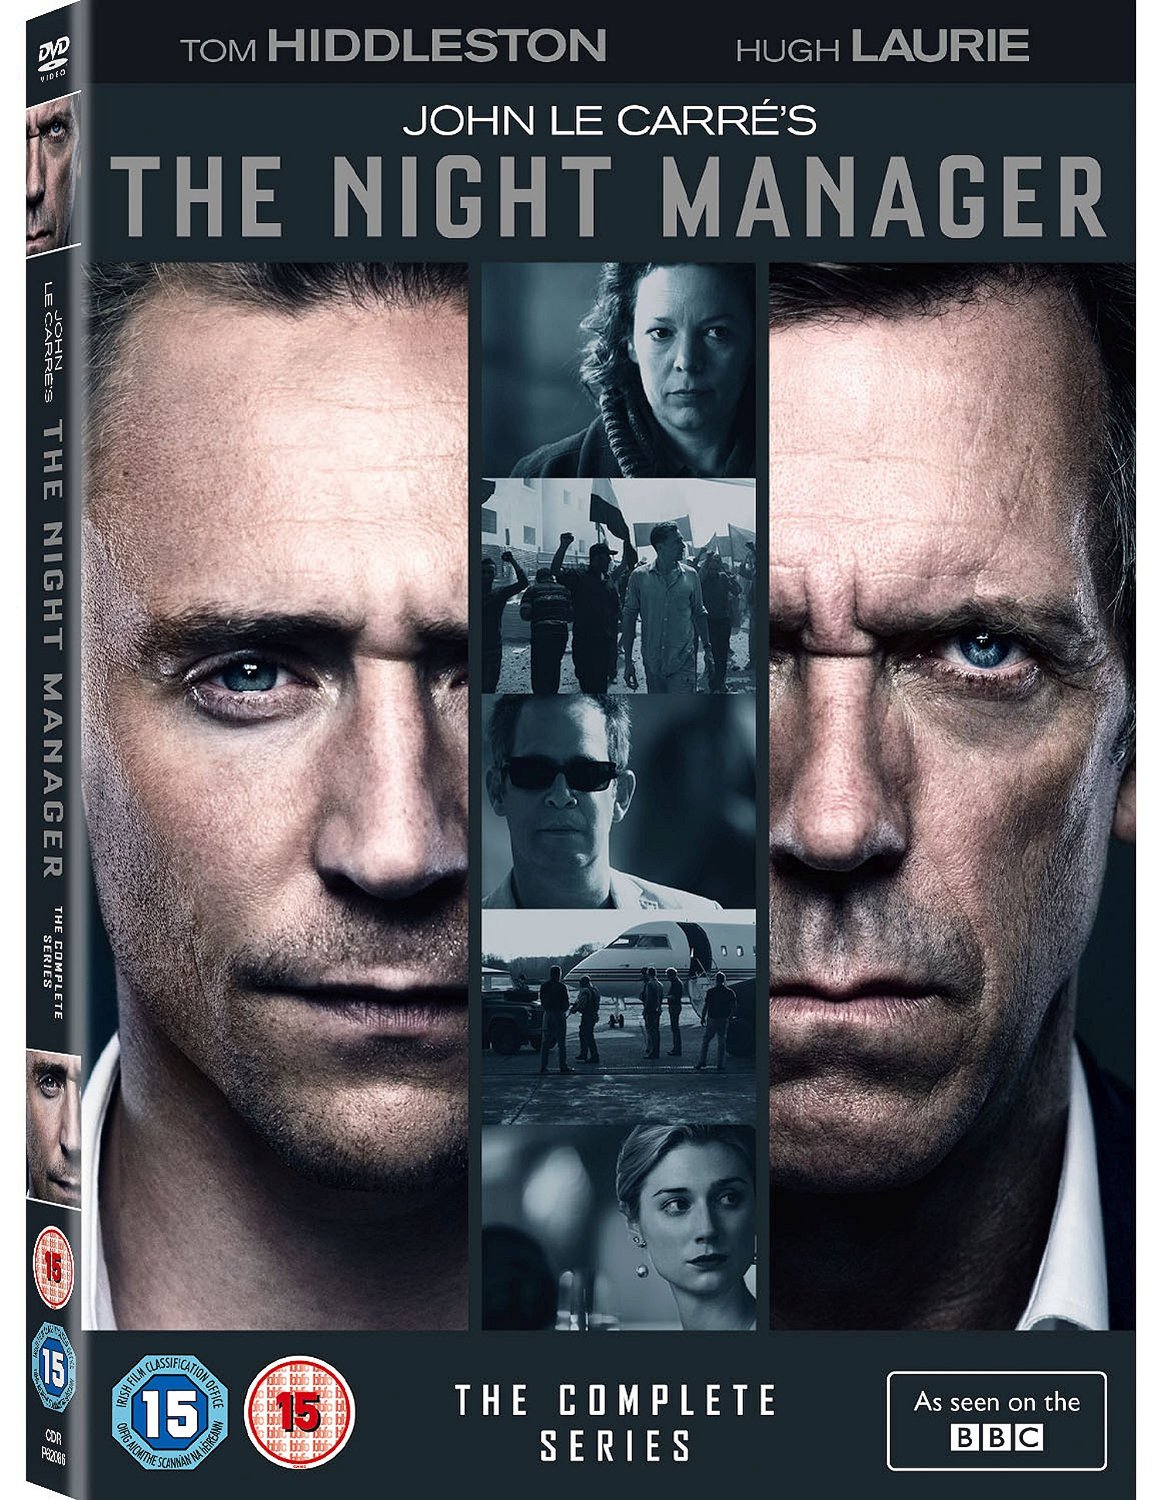 The Night Manager #3